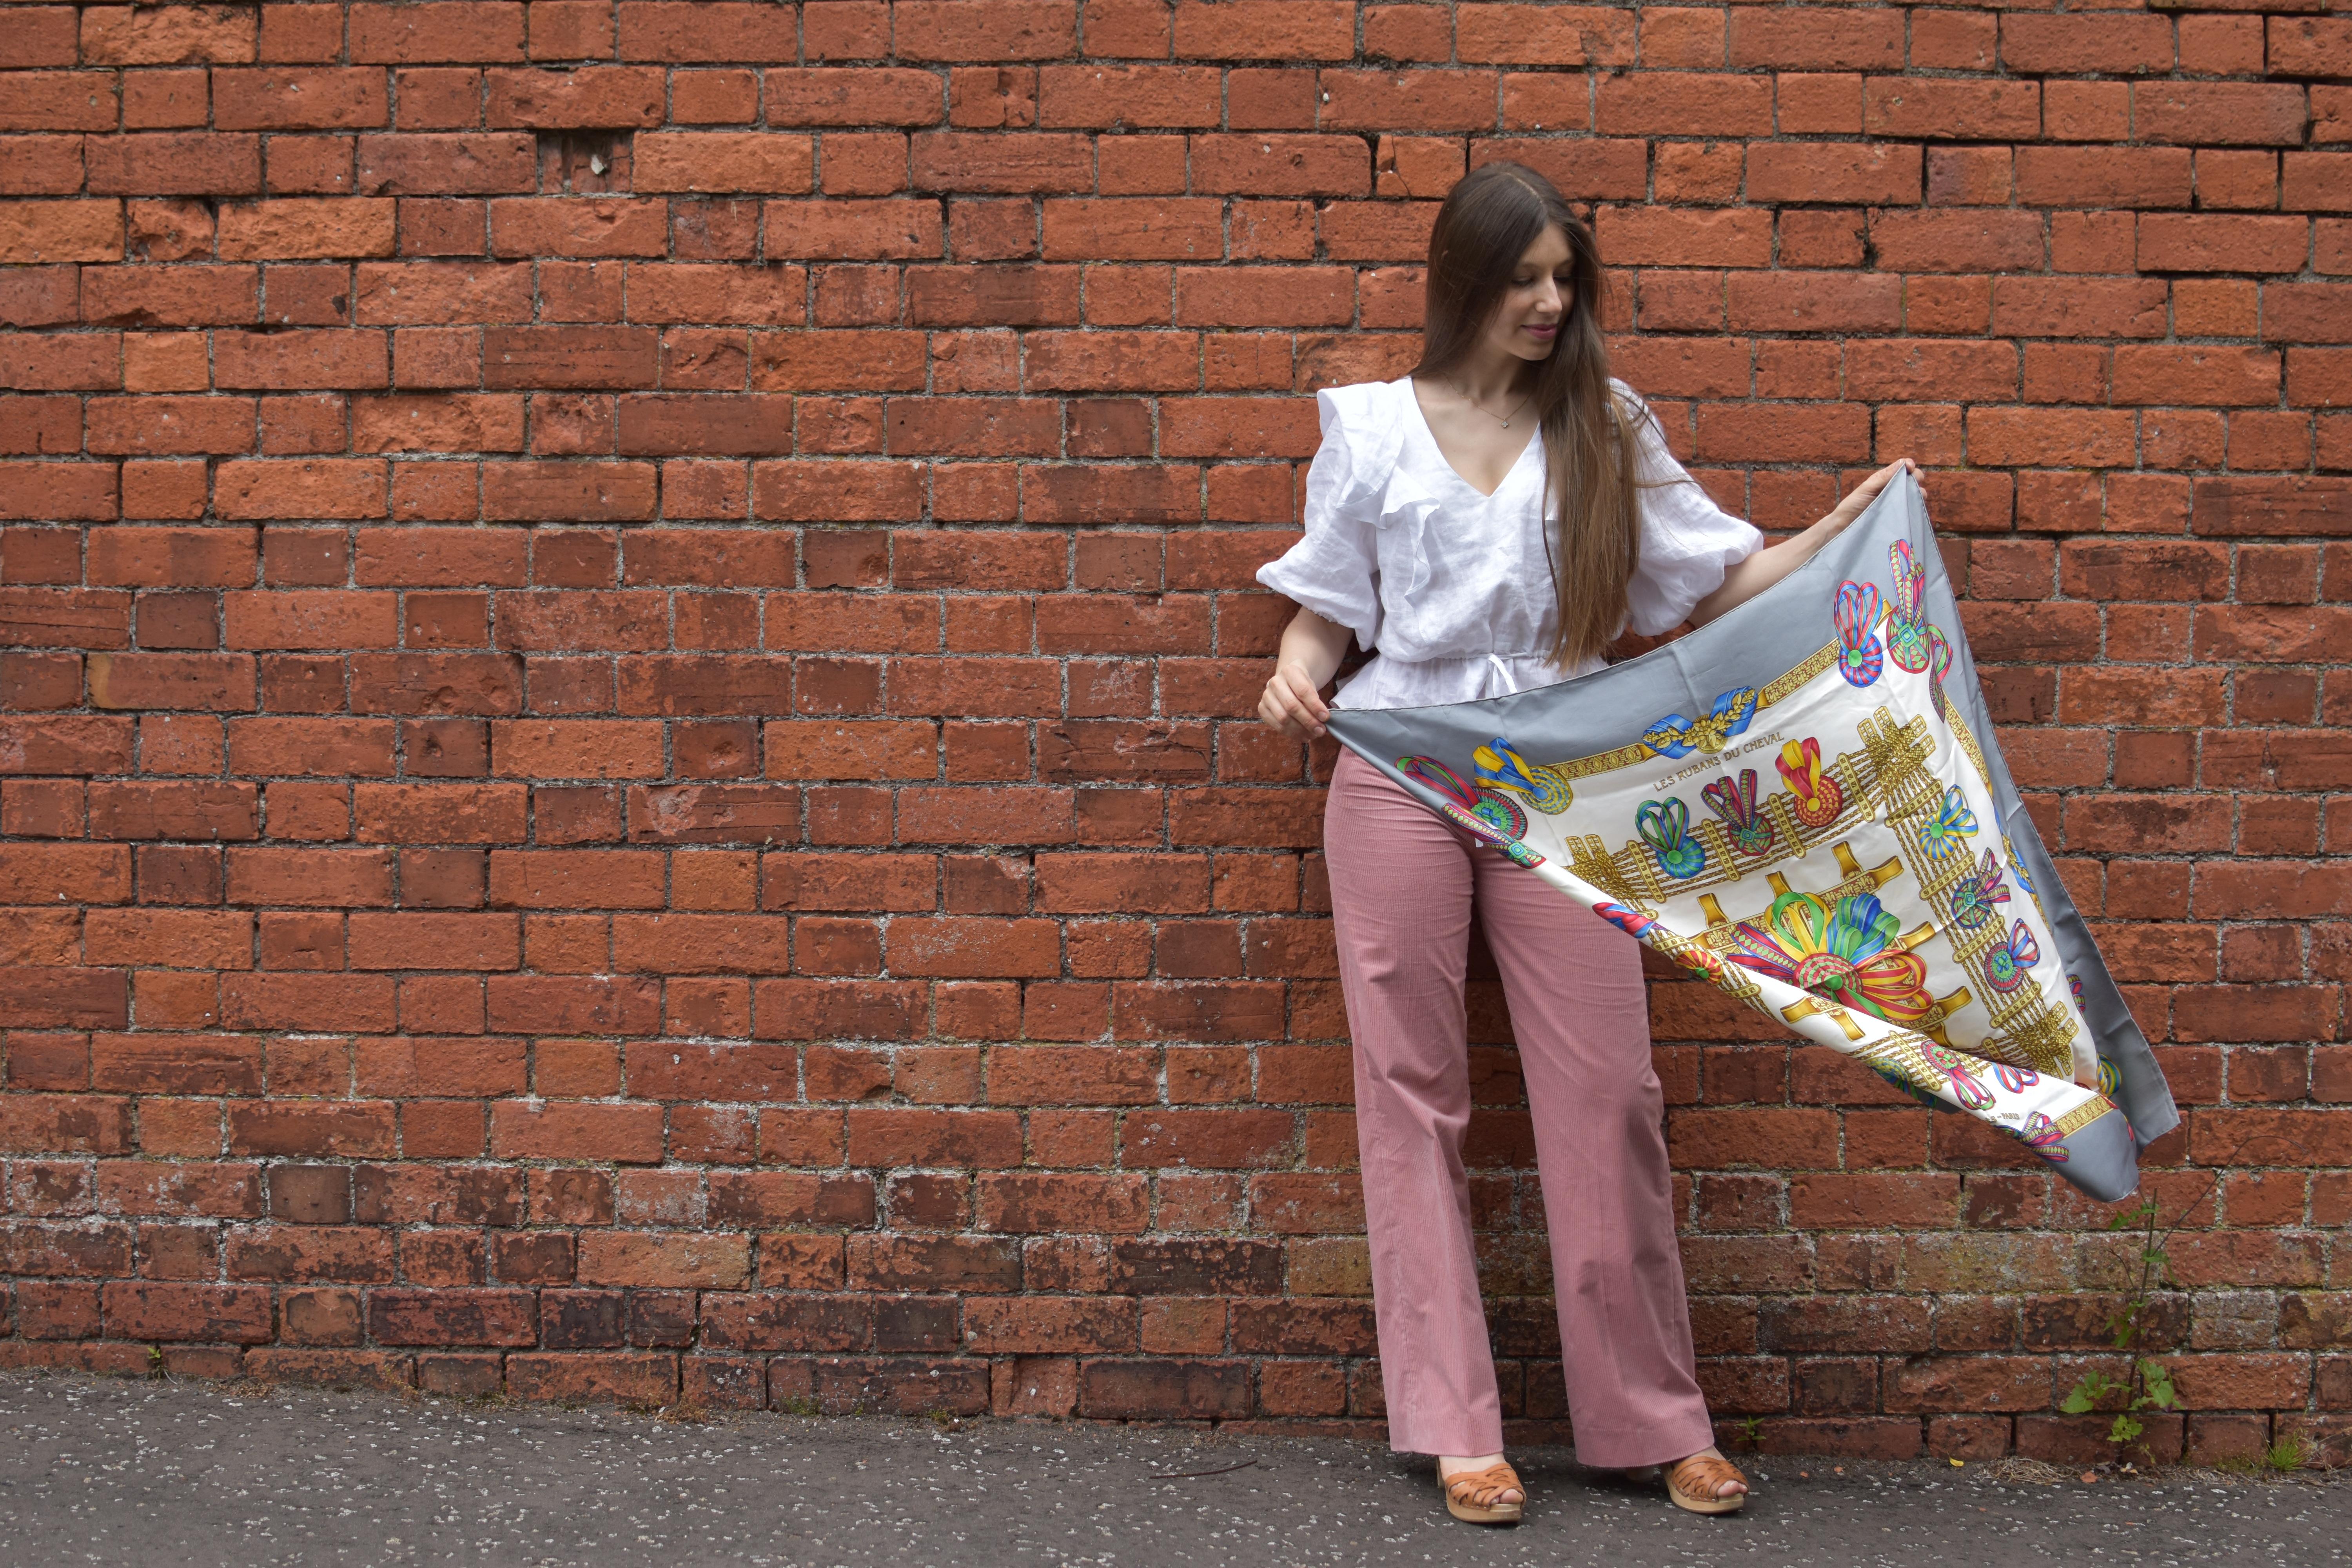 Katie Larmour Studio is the original vintage scarf pillow maker. Gaining notability for her unique idea and creations back in 2013 - featured in the likes of the Financial Times, and first selling here on 1stdibs in 2016 - our creations are of the